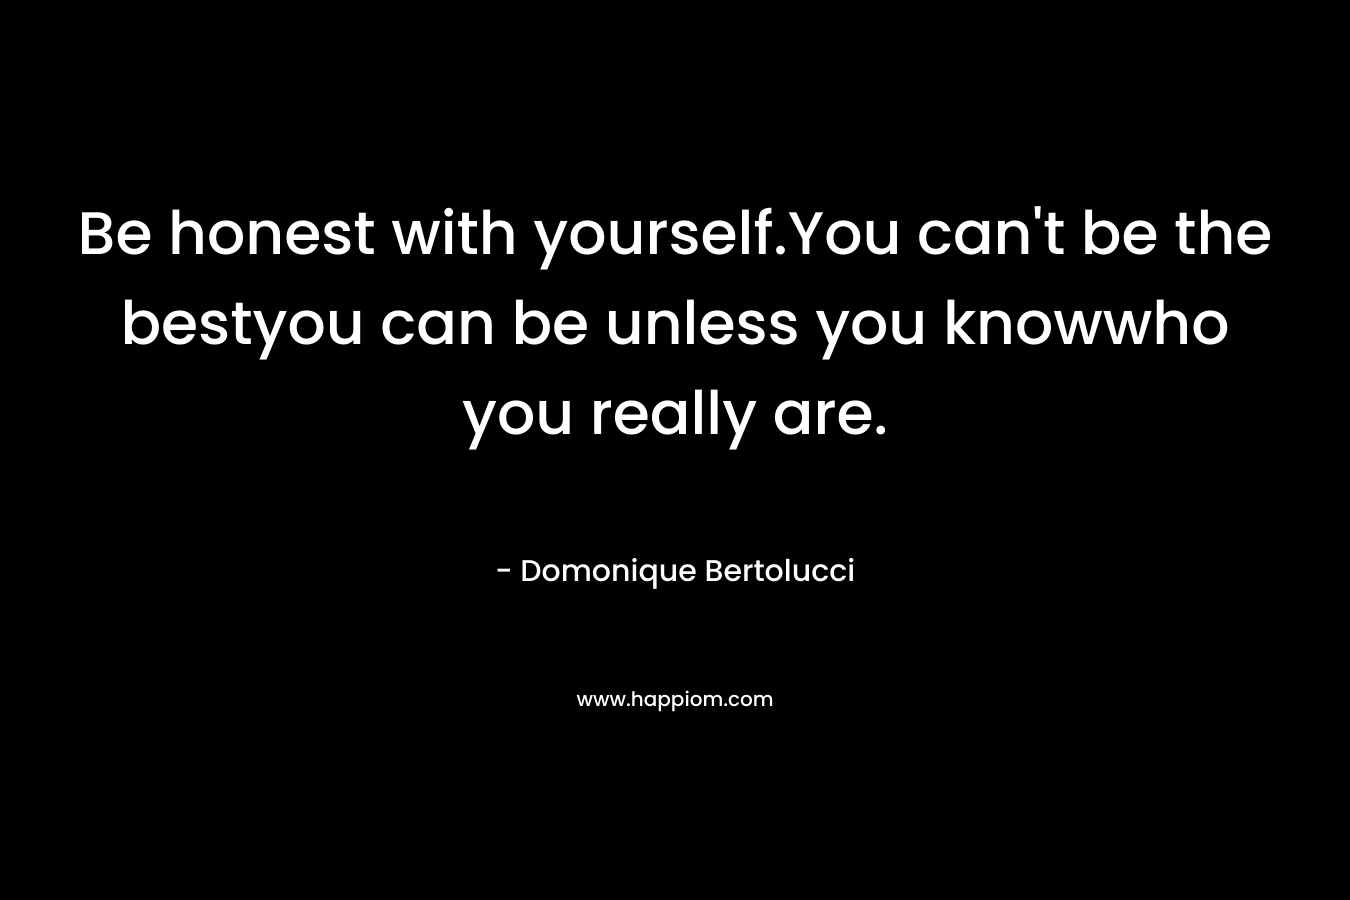 Be honest with yourself.You can’t be the bestyou can be unless you knowwho you really are. – Domonique Bertolucci